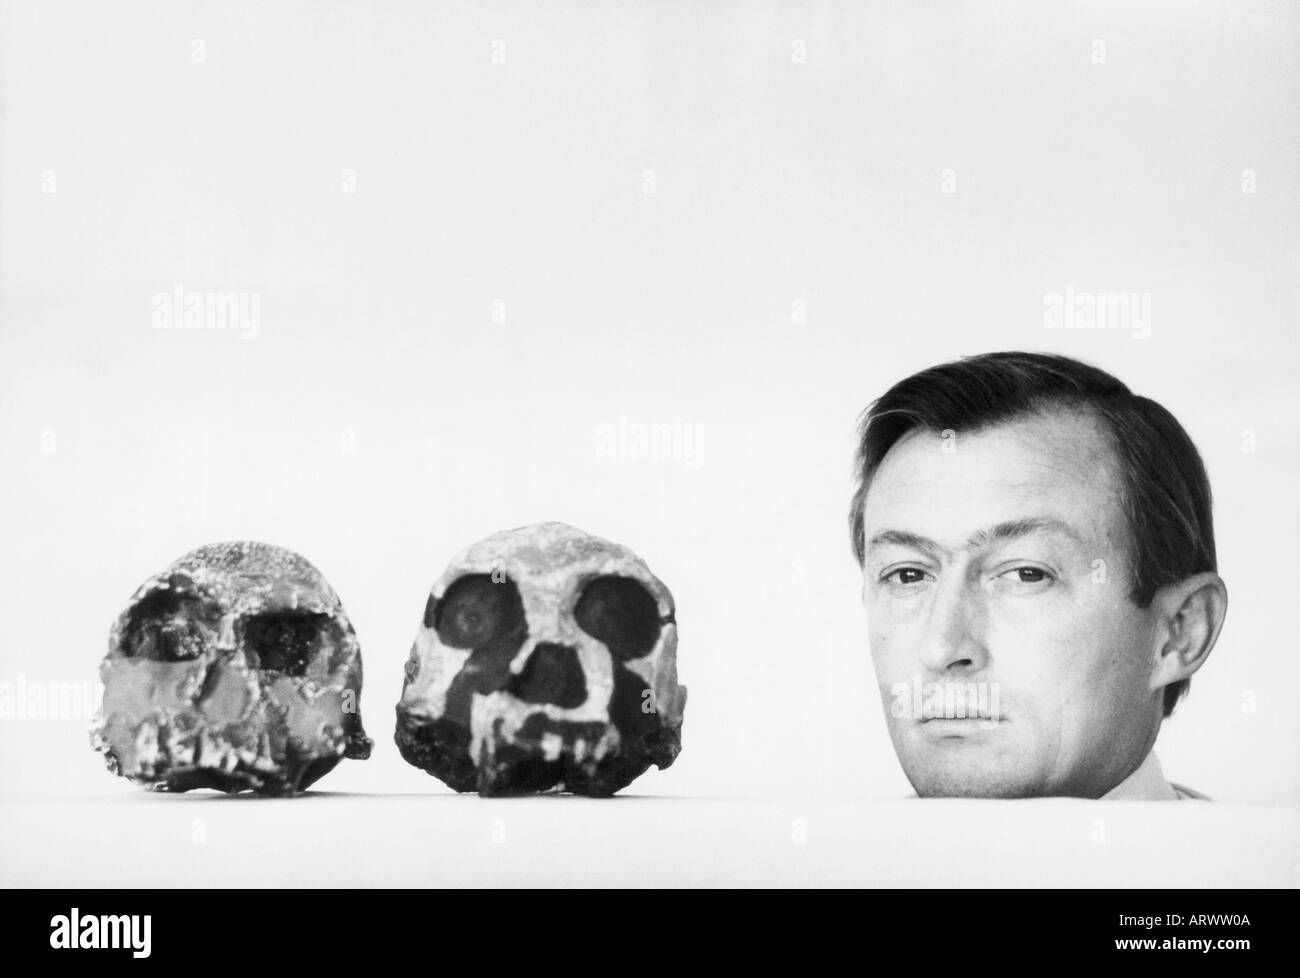 Richard Leakey, in 1978 already a renowned paleoanthropologist, poses with two skulls discovered in his search for human origins Stock Photo